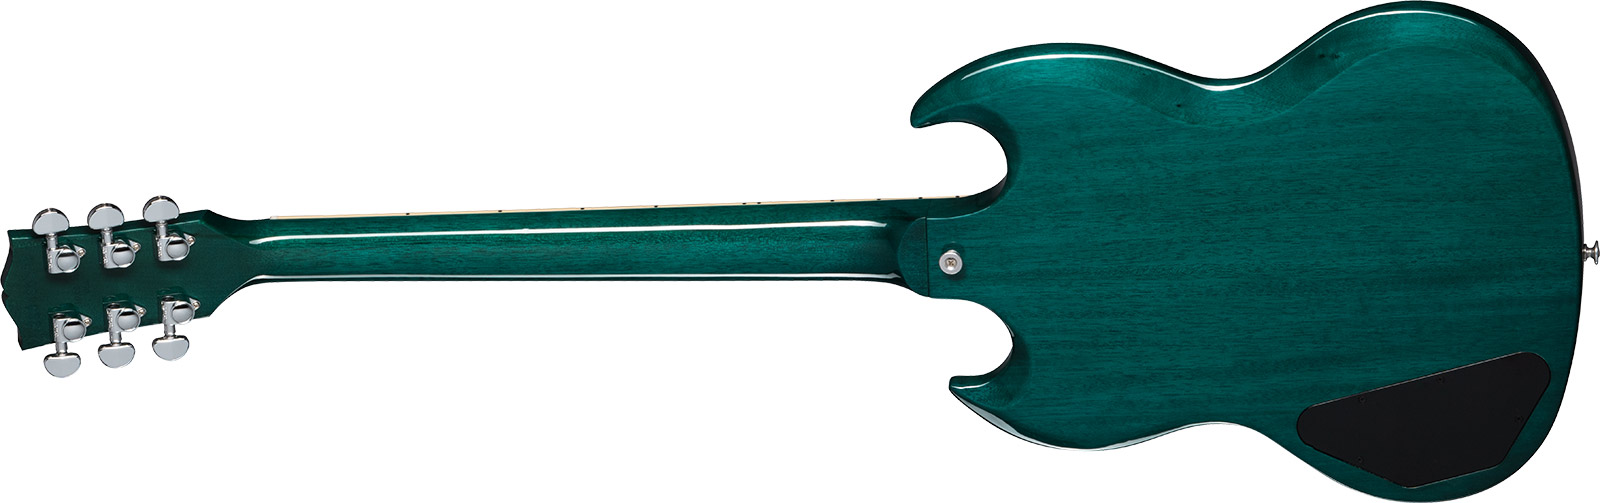 Gibson Sg Standard Custom Color 2h Ht Rw - Translucent Teal - Double cut electric guitar - Variation 1